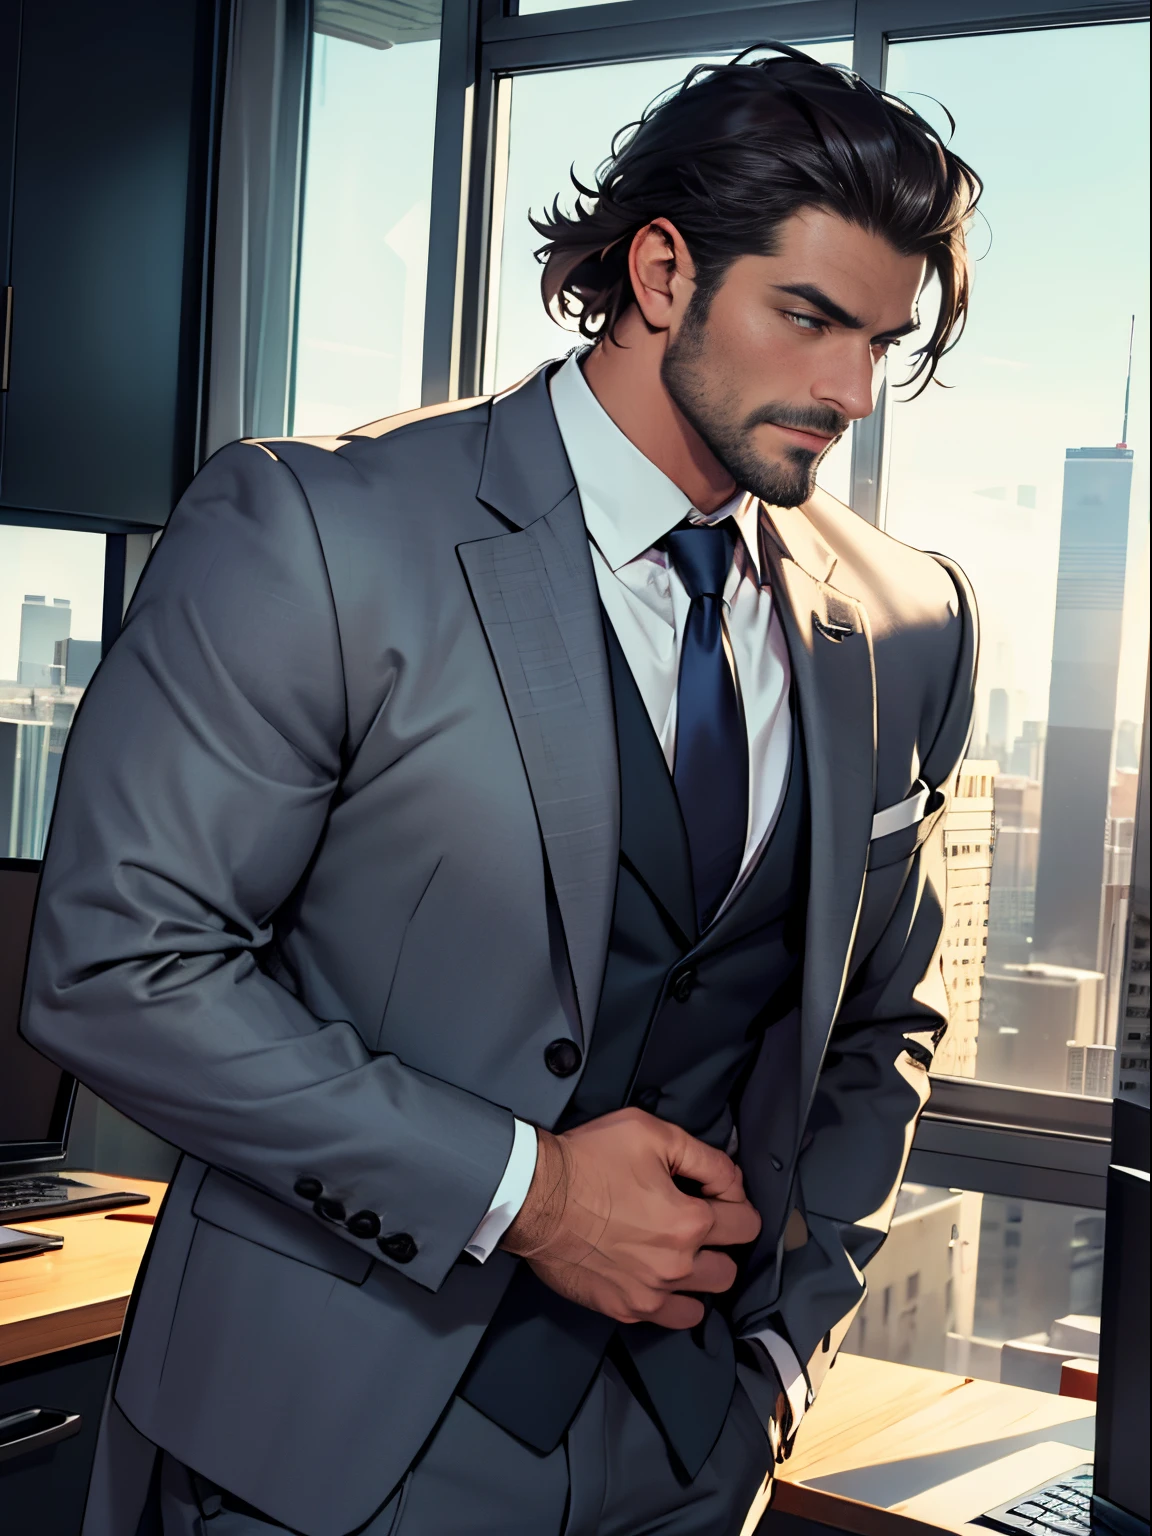 distinguished gentleman in a tailored suit, mature, stubble, CEO in an office skyline view, confident posture, muscular, revealing clothes